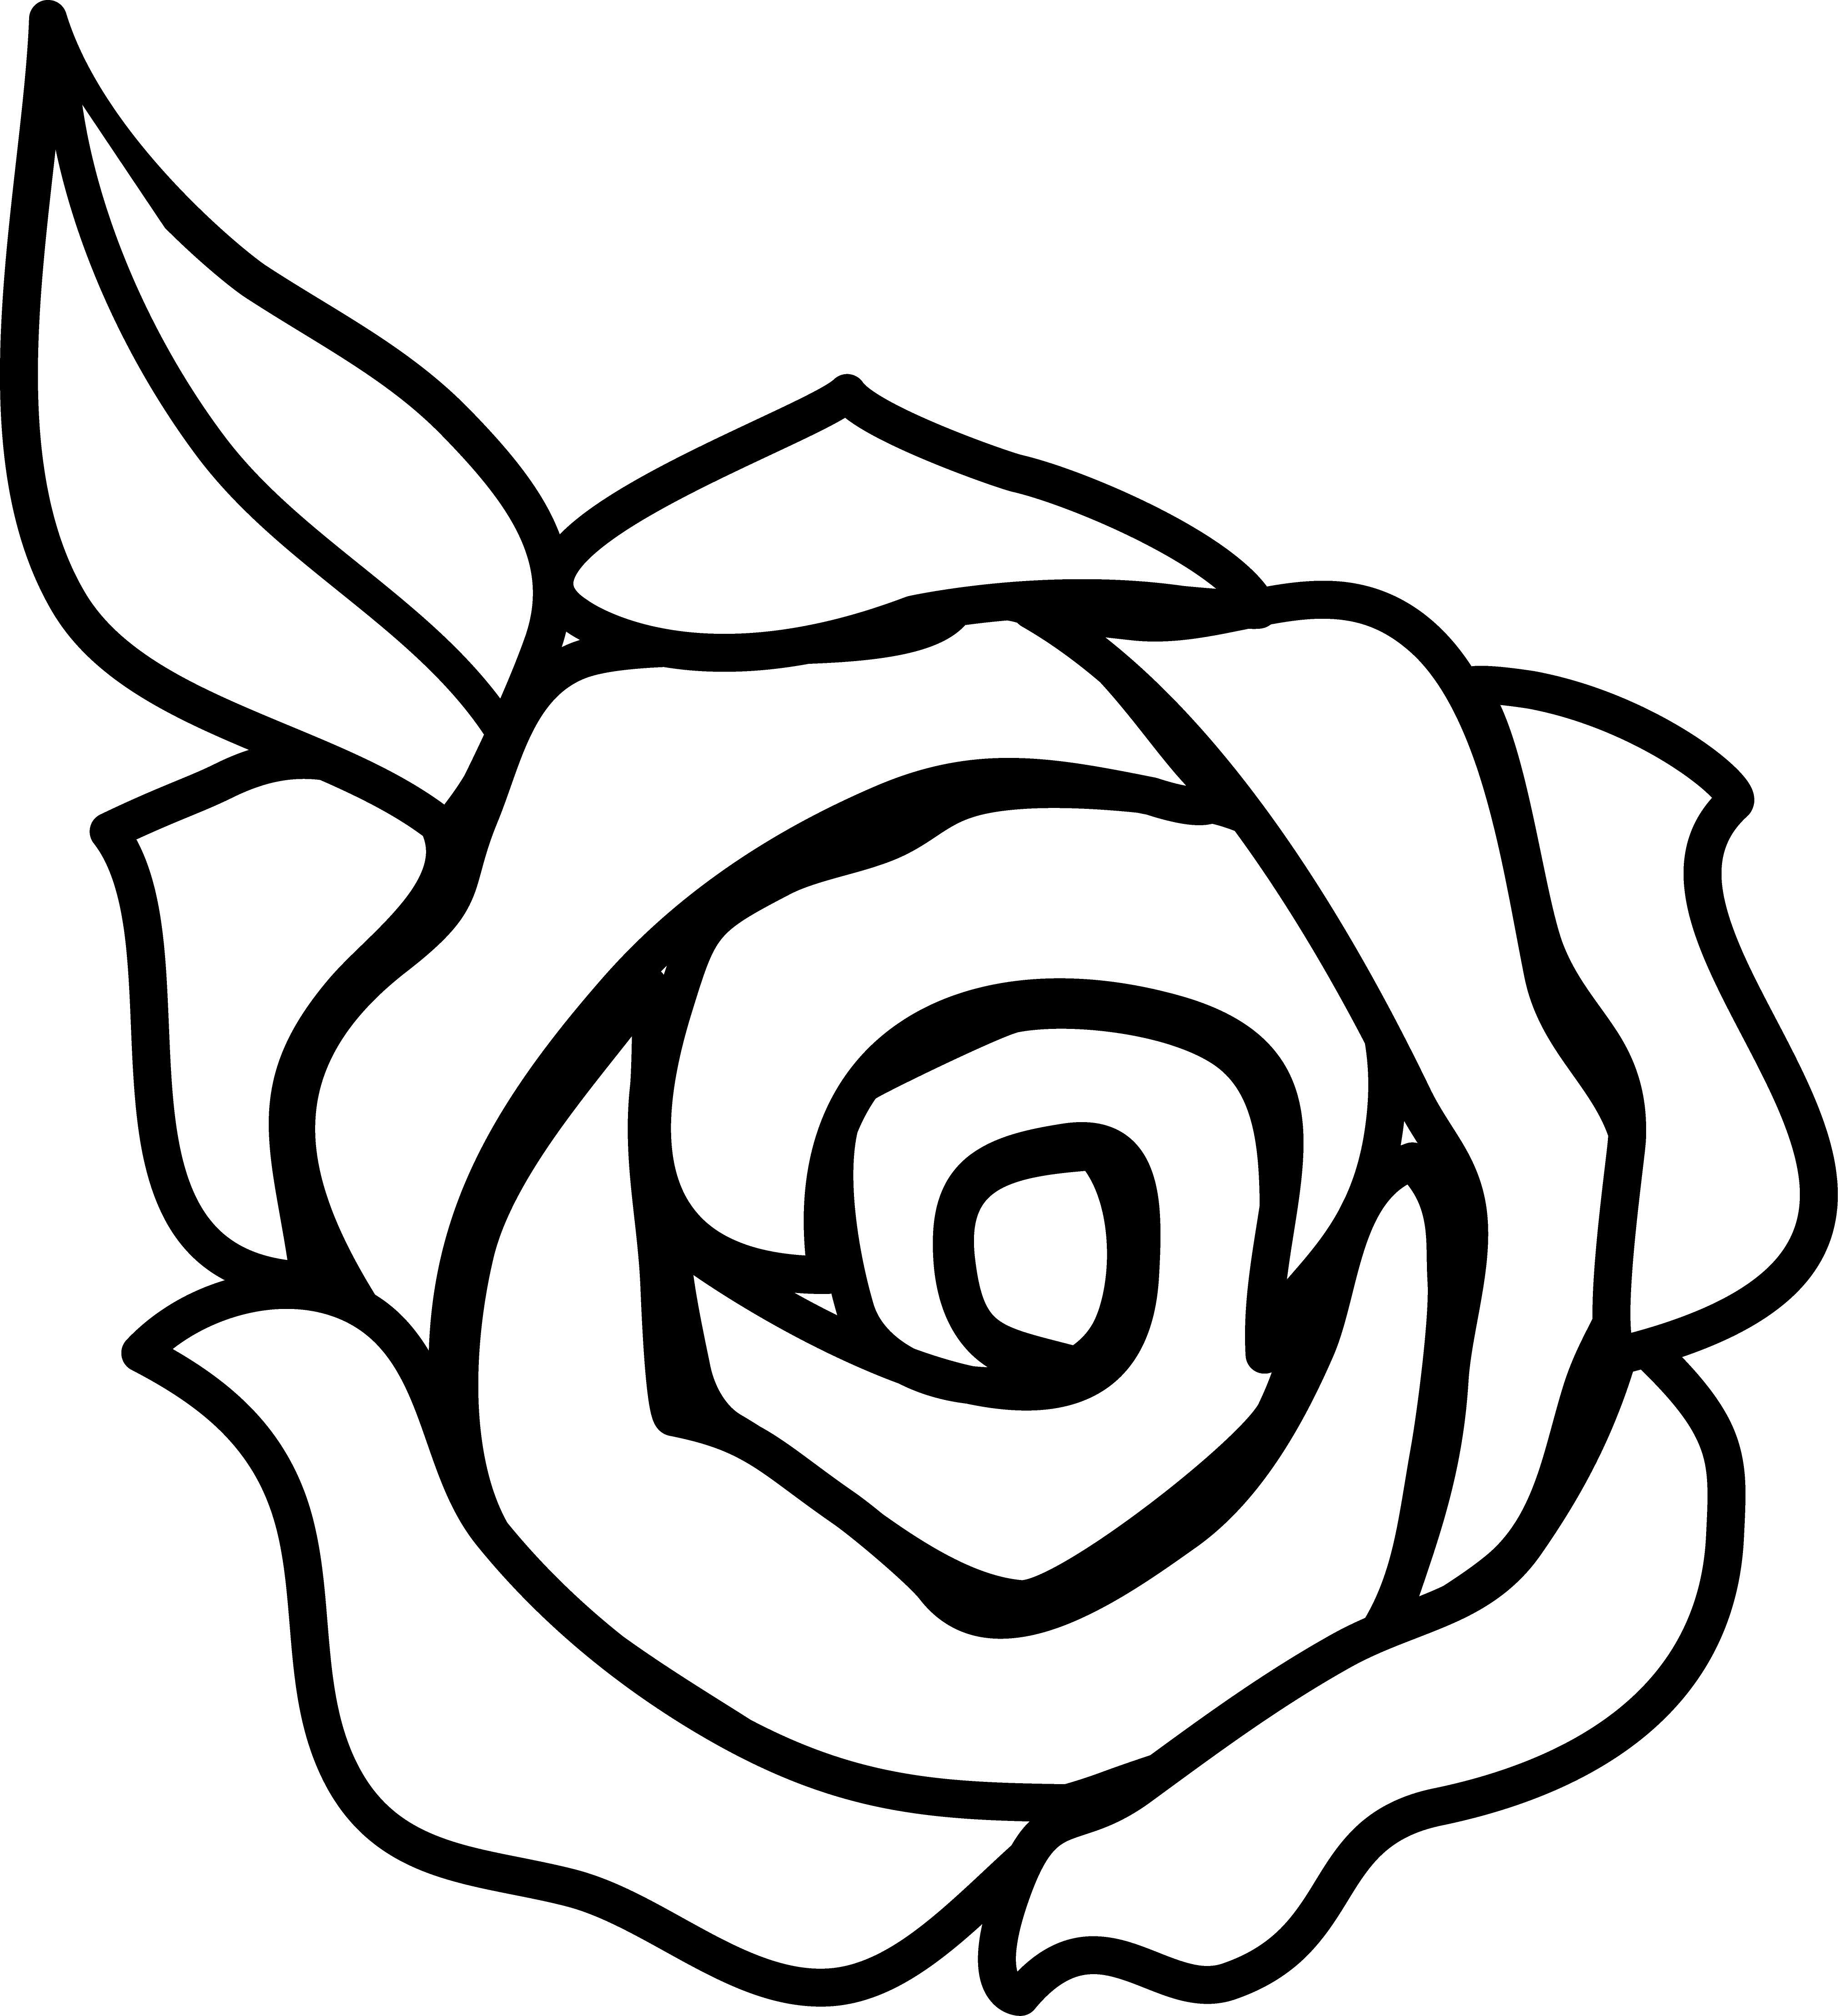 Roses rose clip art black and white free clipart images